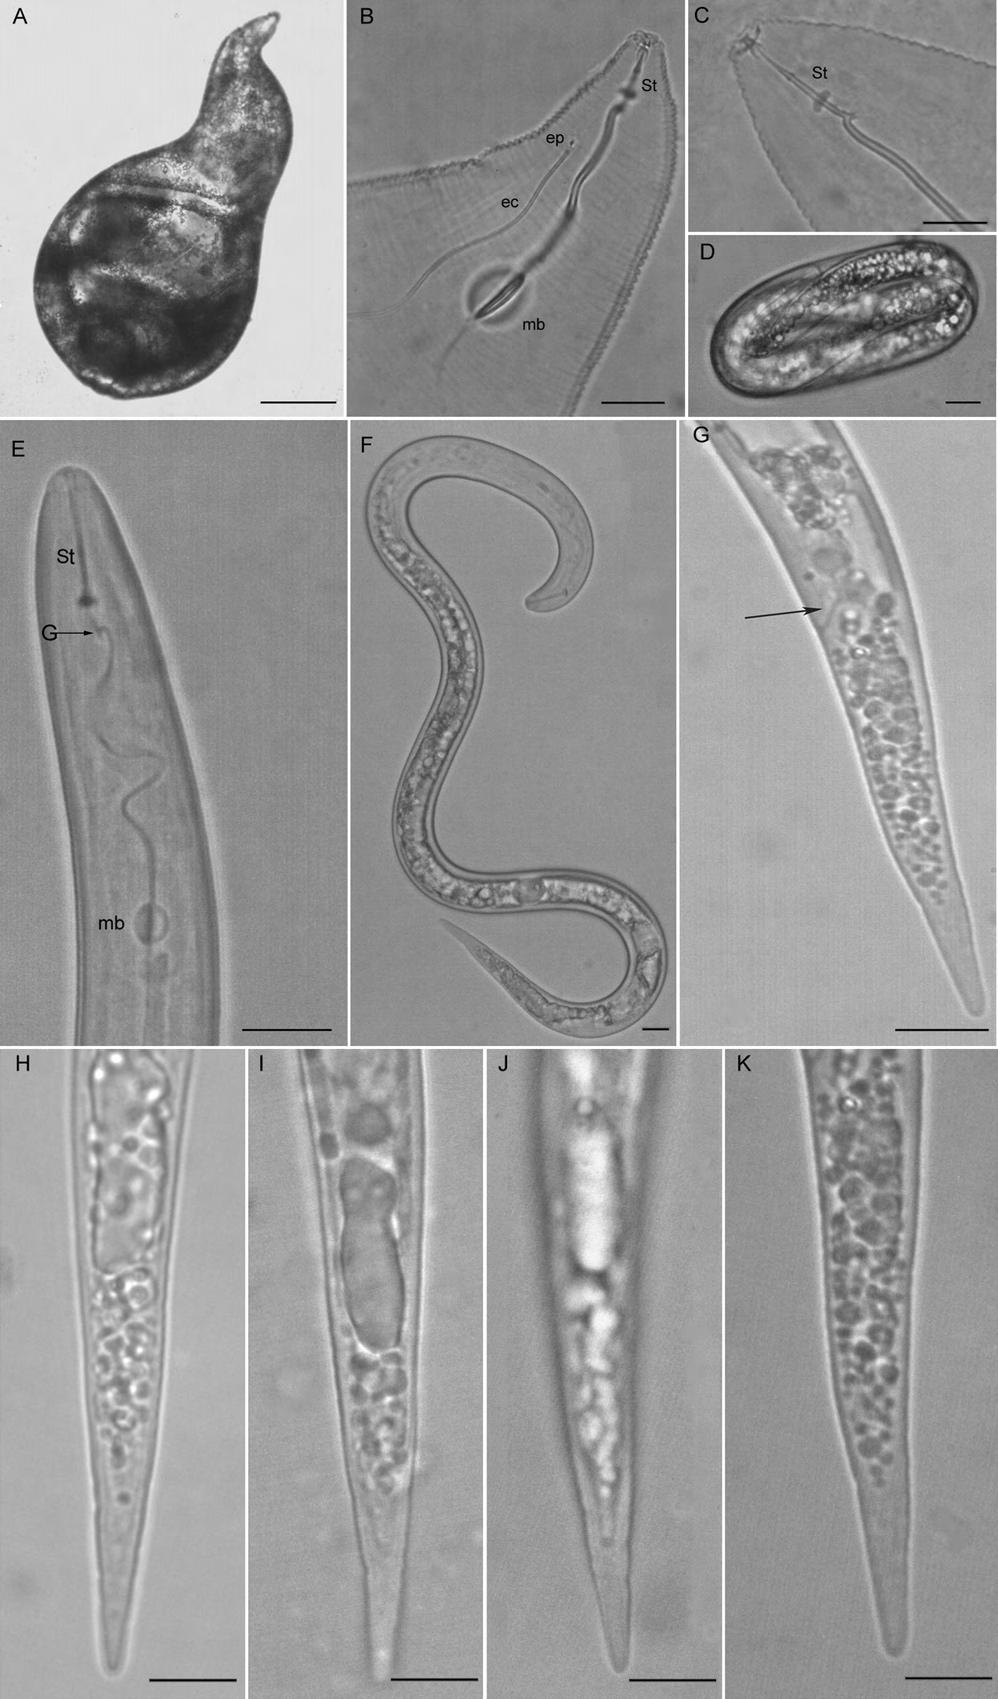 Meloidogyne arenaria from Argentina: García and Sánchez-Puerta 295 FIG. 2. Micrographs of females (A-C), eggs (D) and second-stages juveniles (E-K) of Meloidogyne arenaria from Argentina.